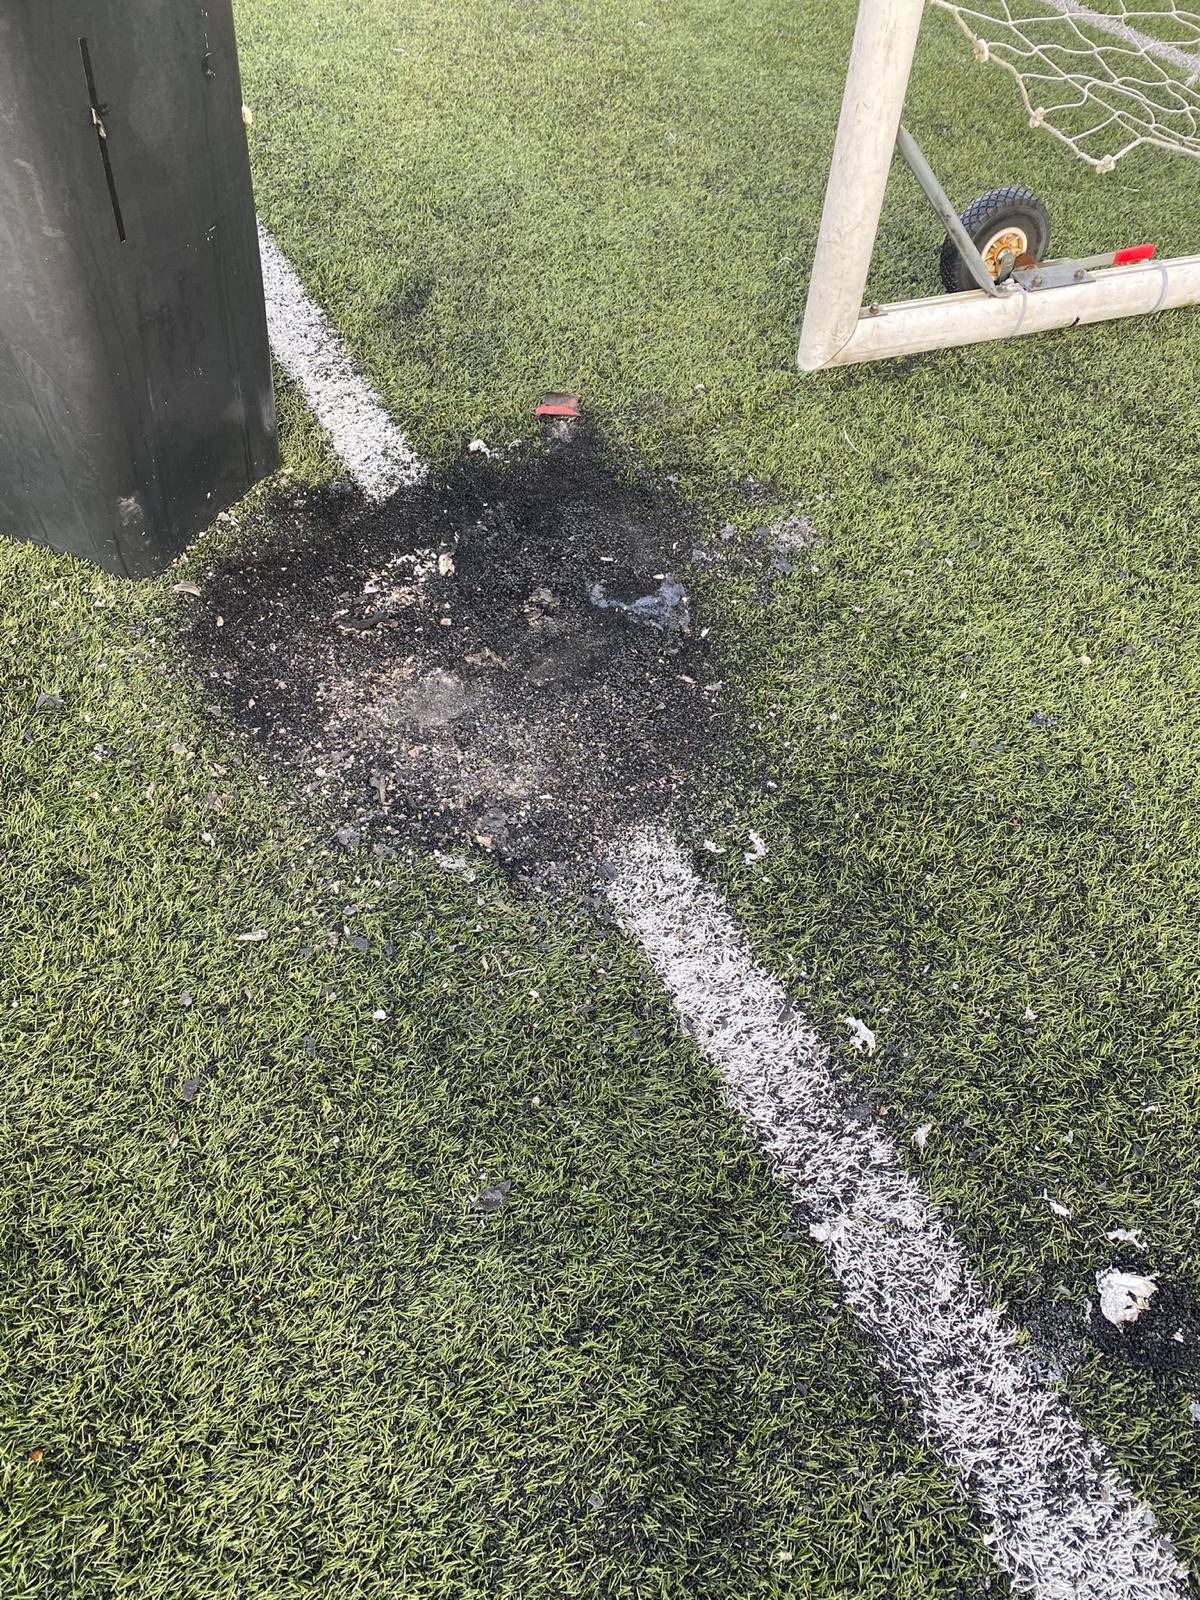 A burned section of a 3G pitch